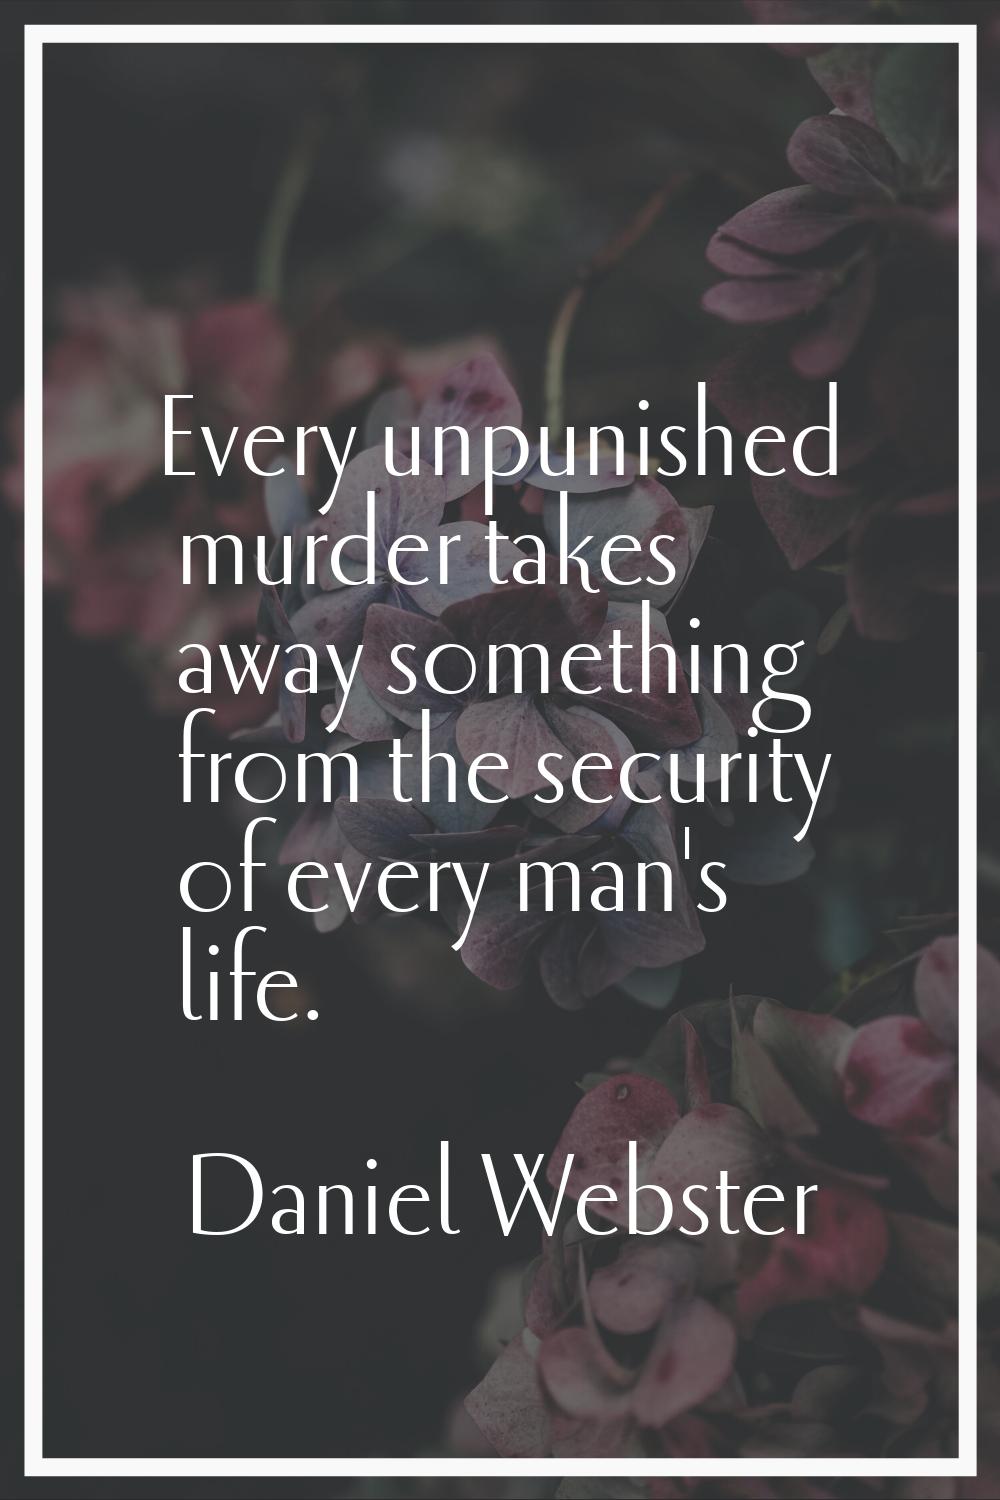 Every unpunished murder takes away something from the security of every man's life.